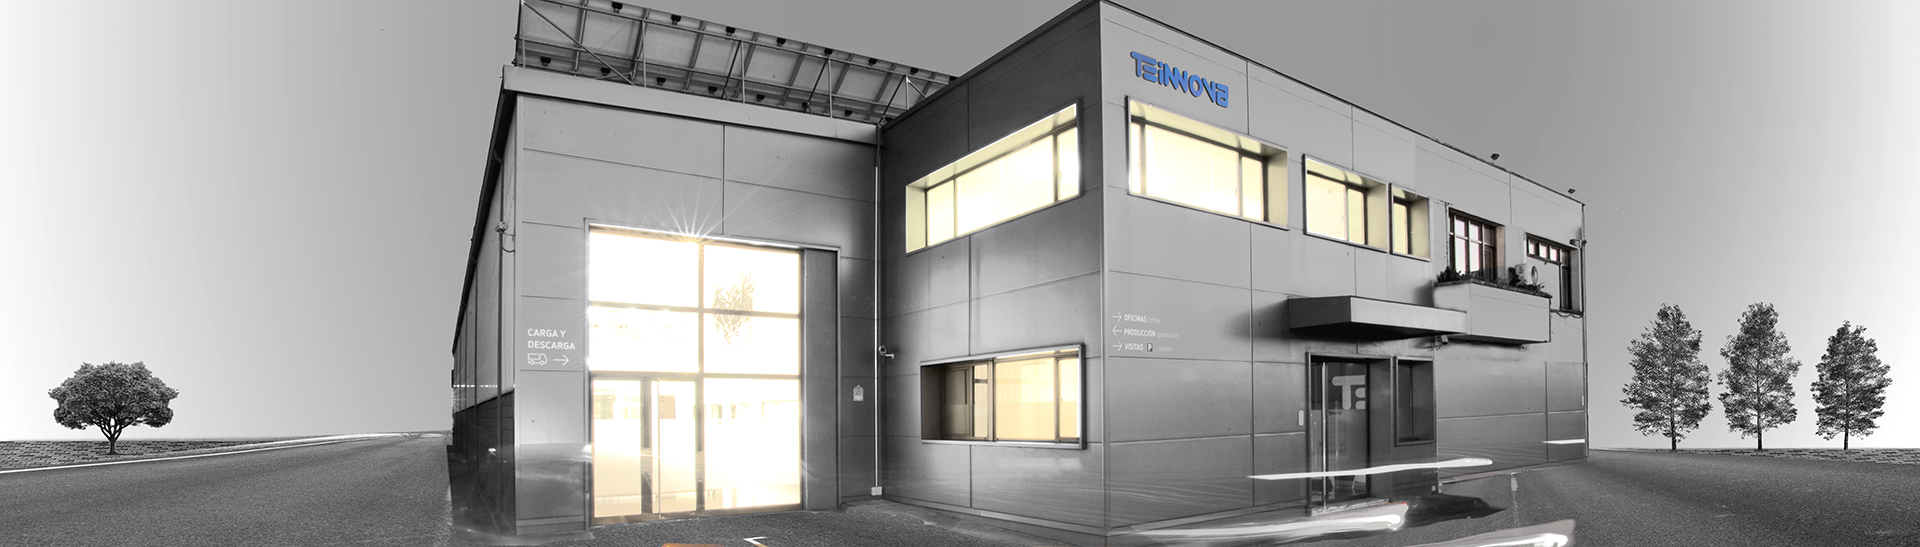 Teinnova professionals in technical cleaning